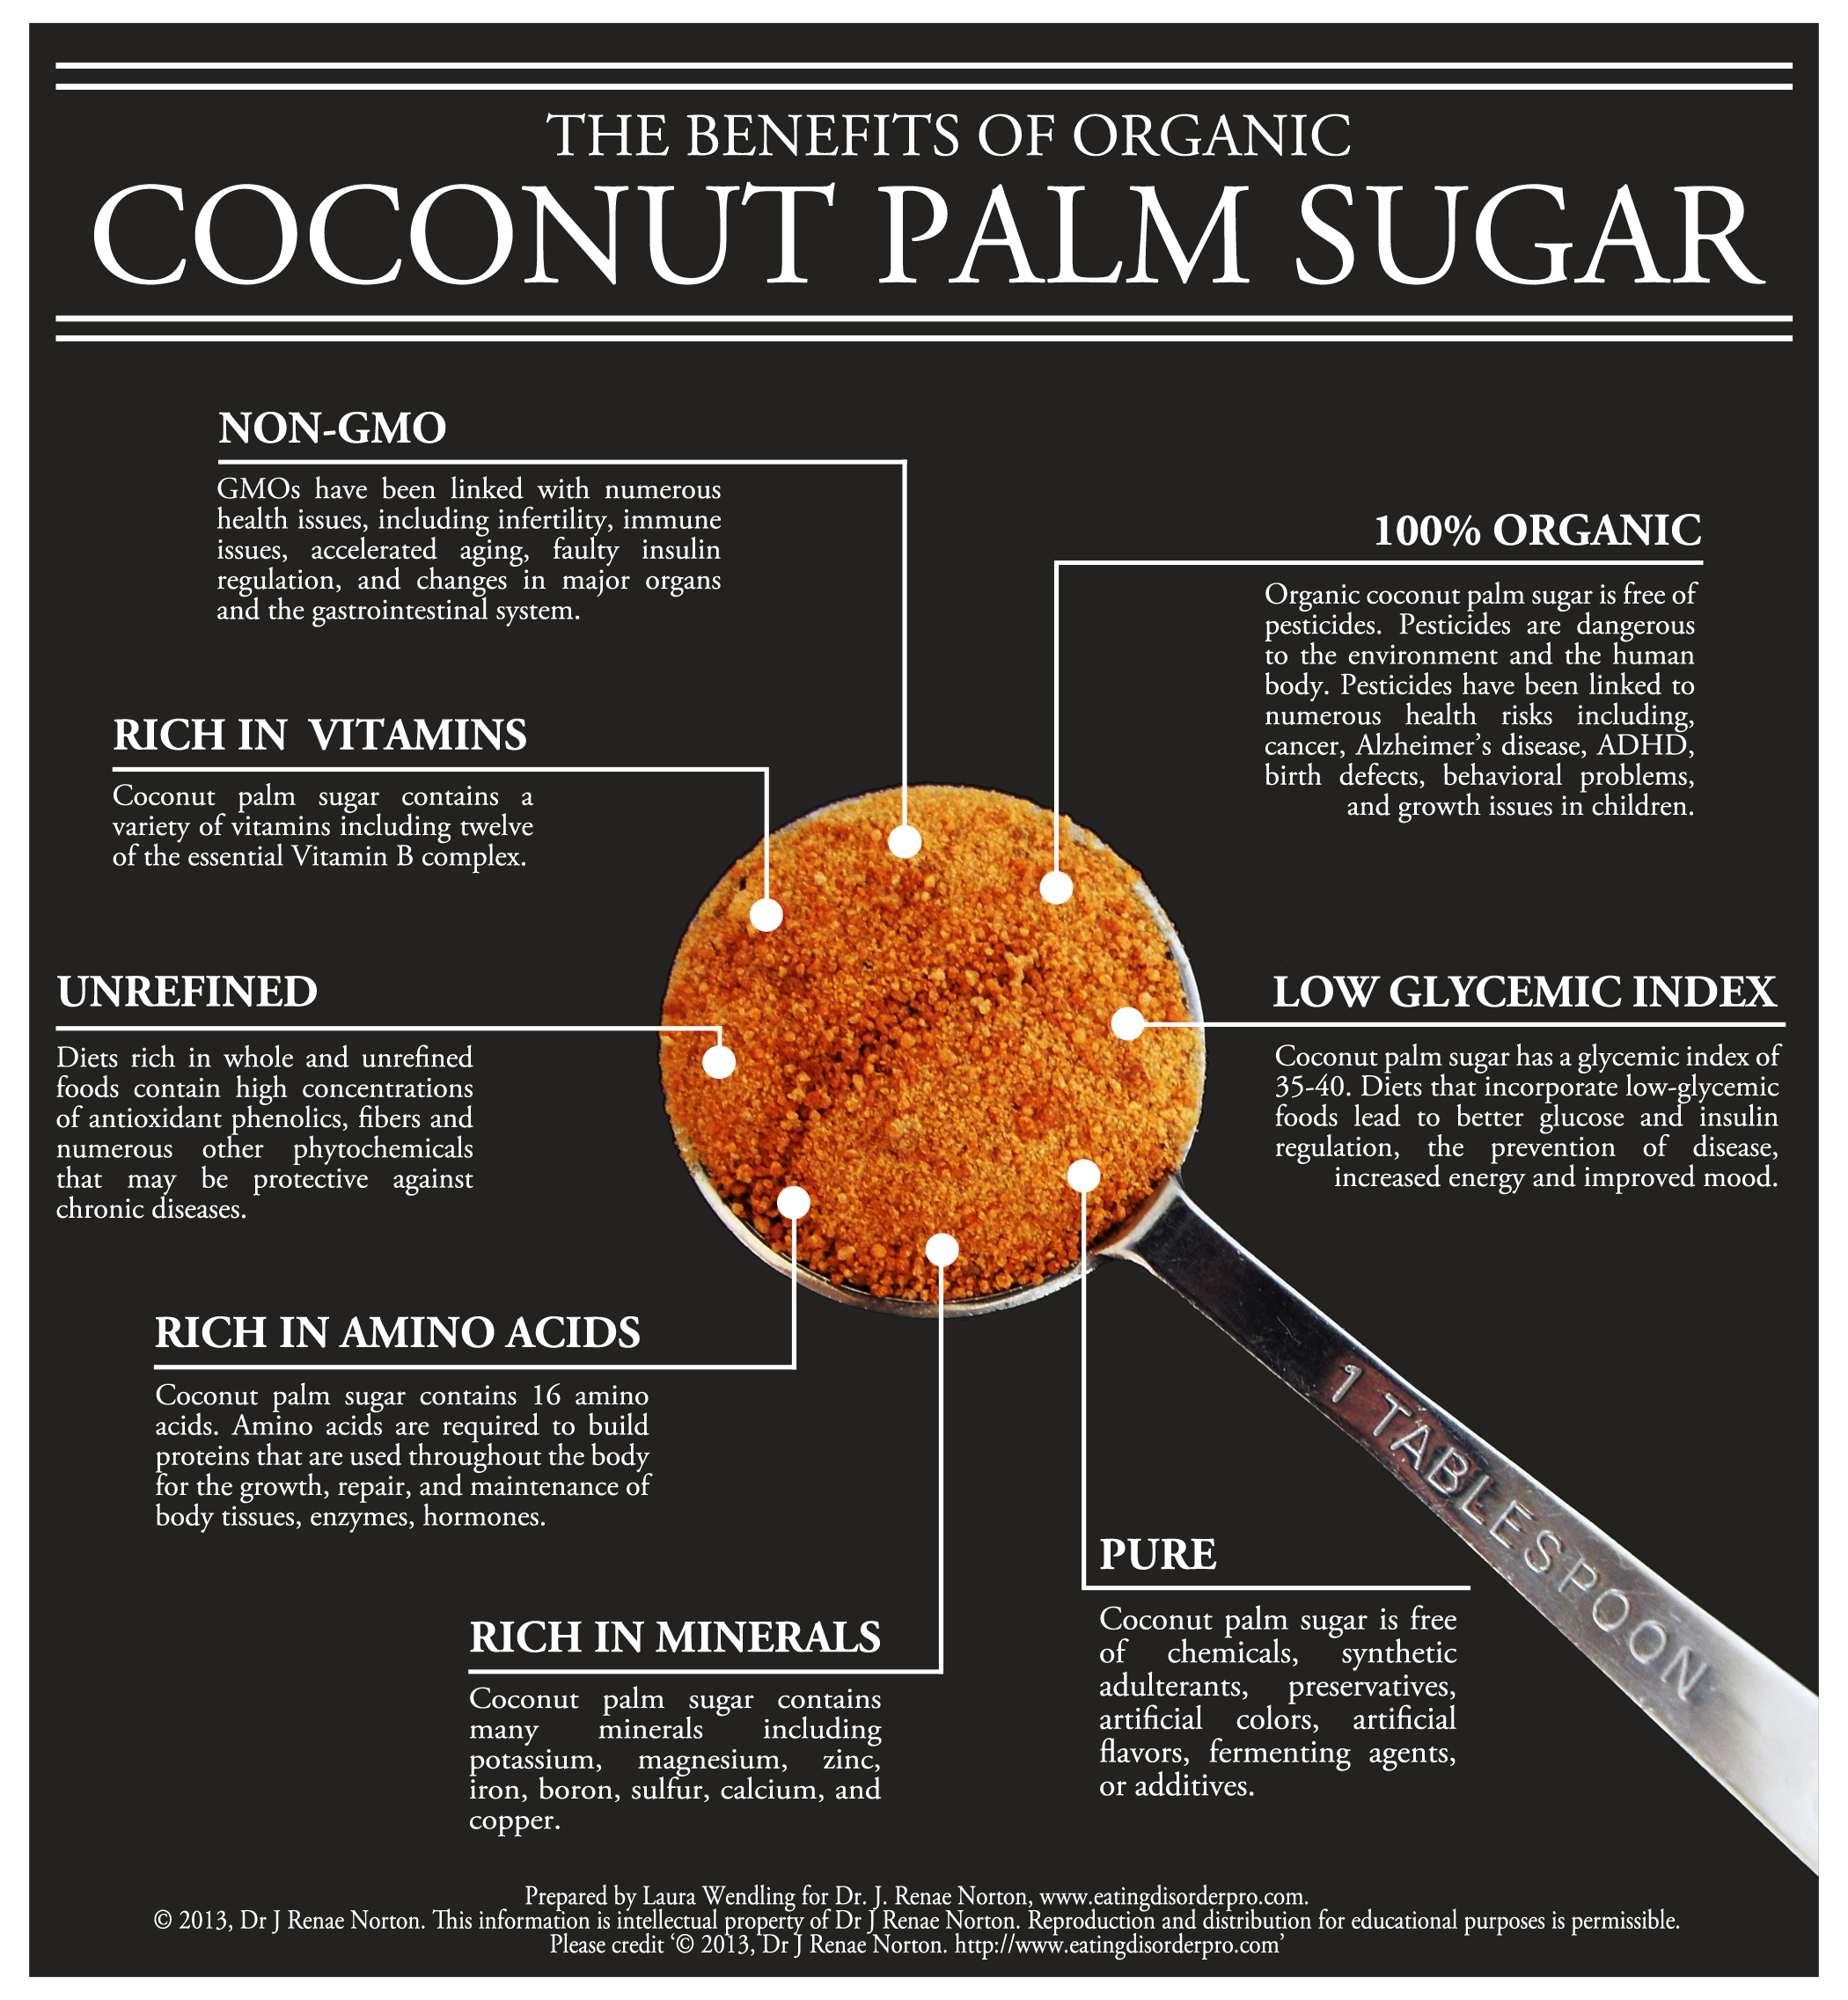 Could This Natural Sweetener Be A Healthy Alternative To Refined Sugar? Infographic